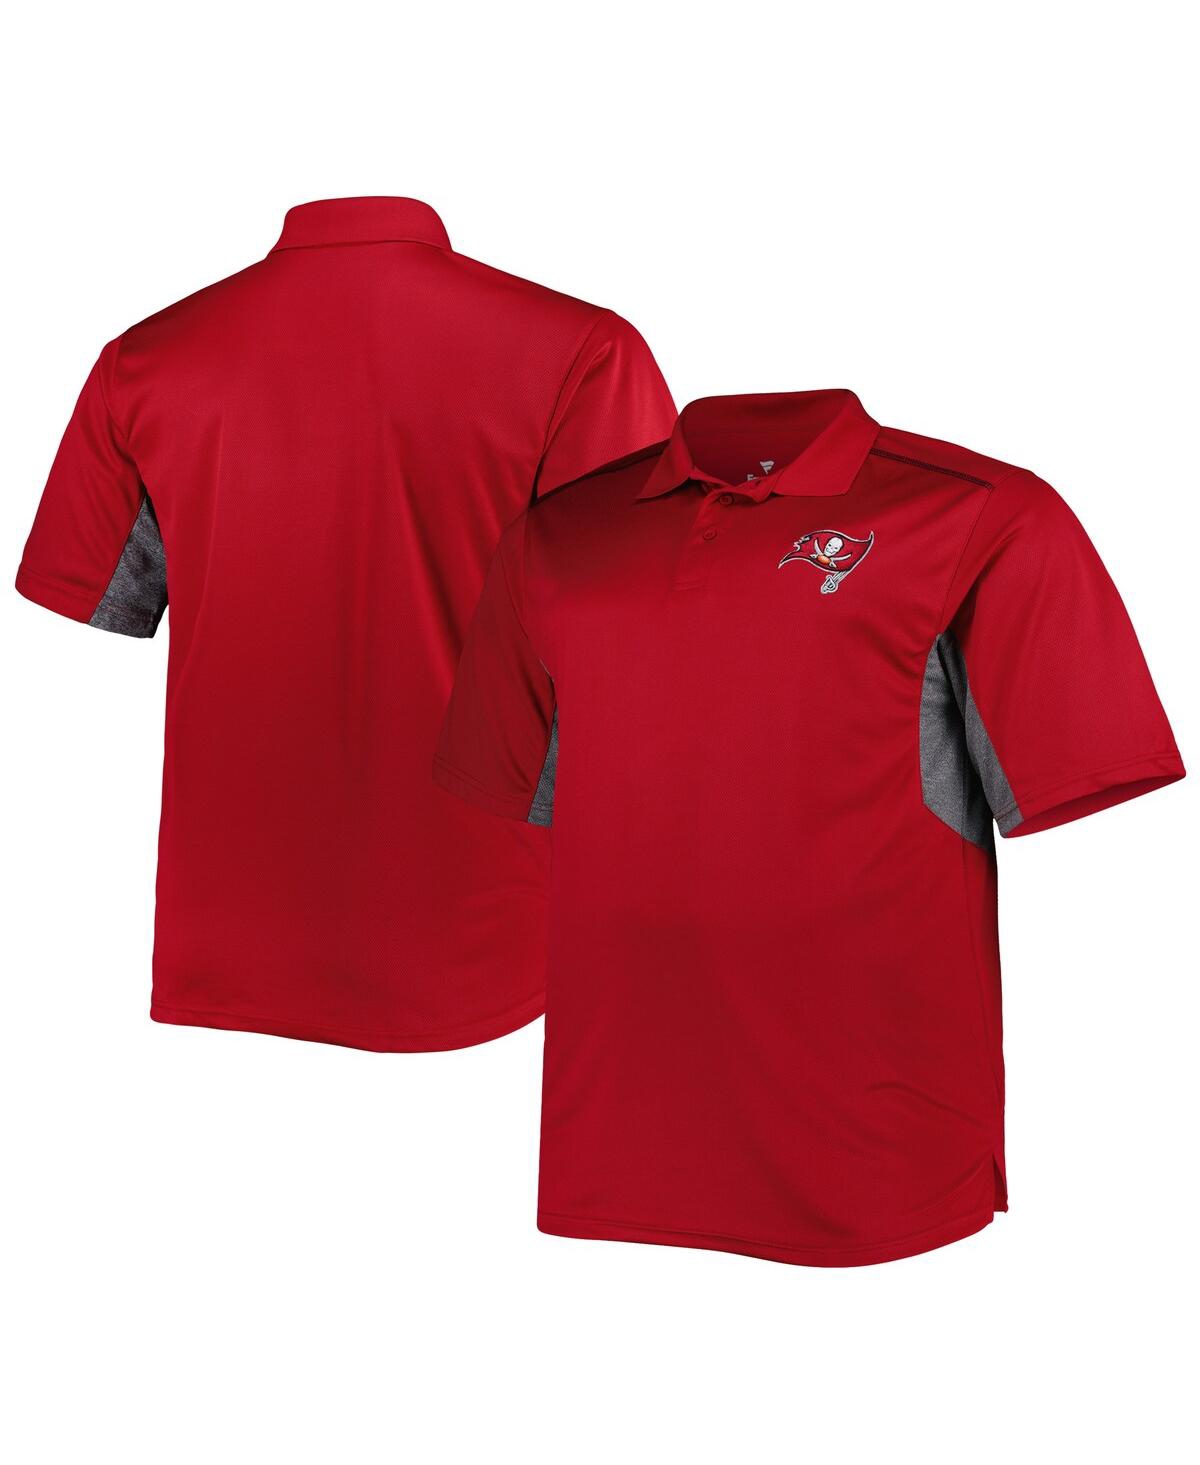 Fanatics Men's Red Tampa Bay Buccaneers Big And Tall Team Color Polo Shirt